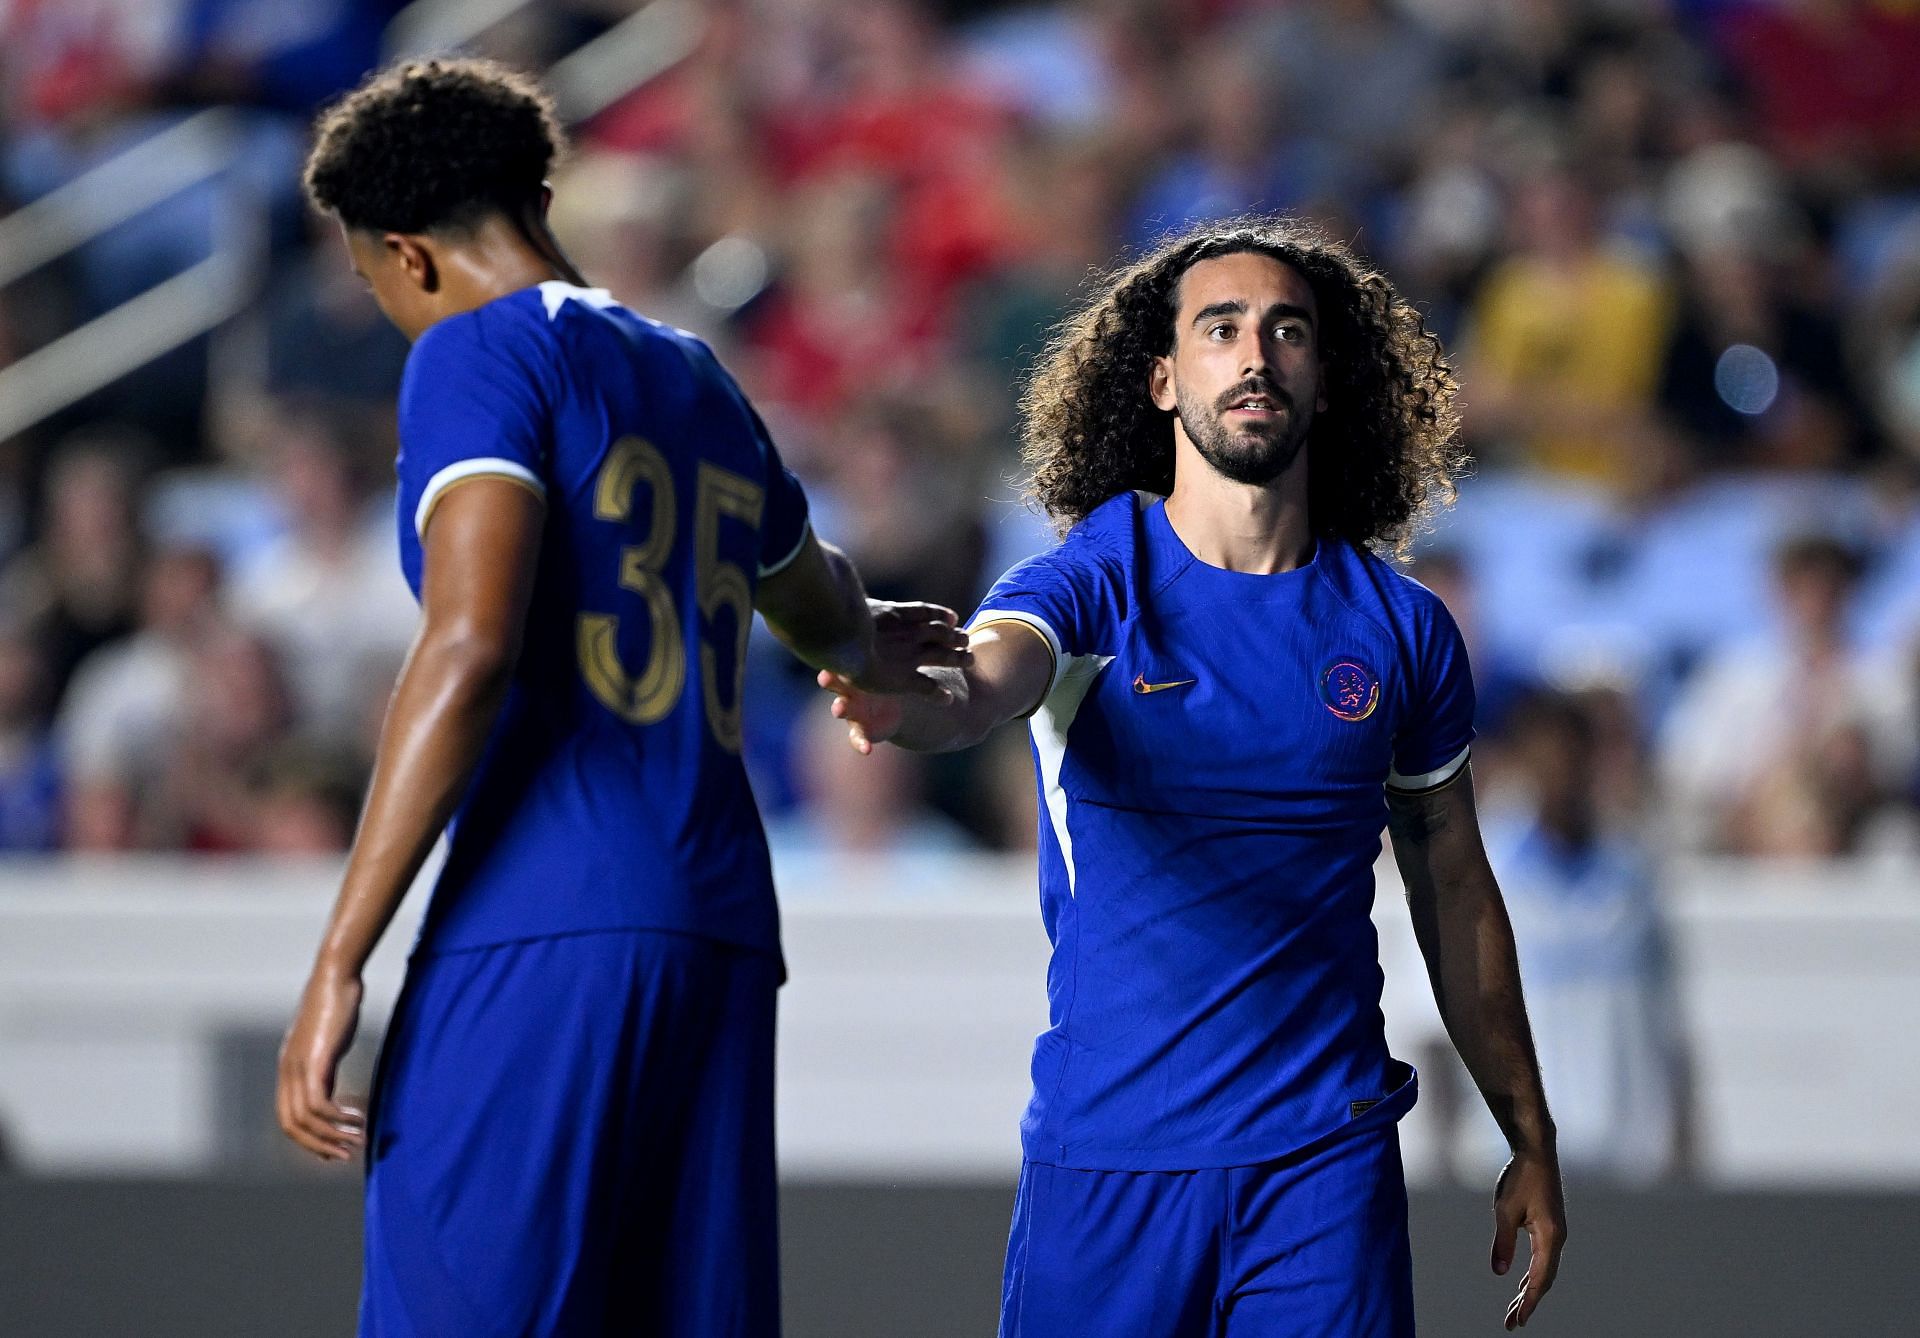 Manchester City were interested in signing Cucurella (right) on loan.